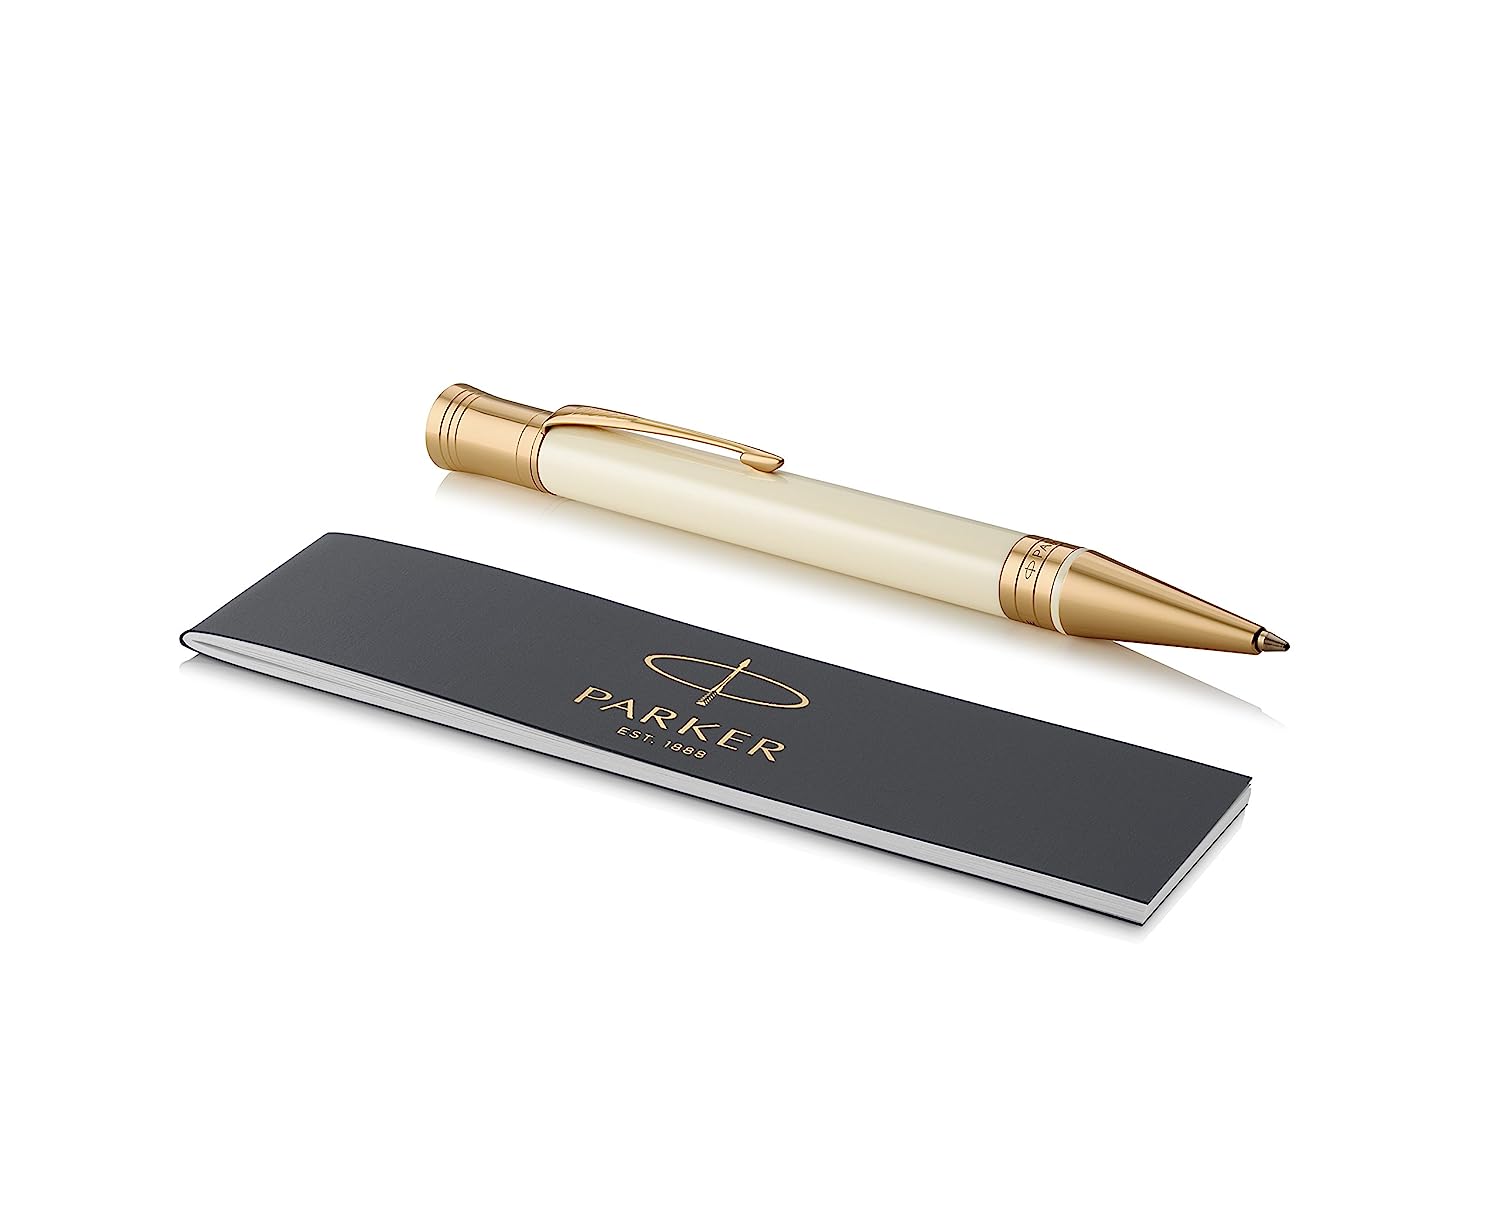 Parker Duofold Classic Ivory with Gold Trim Ballpoint Pen